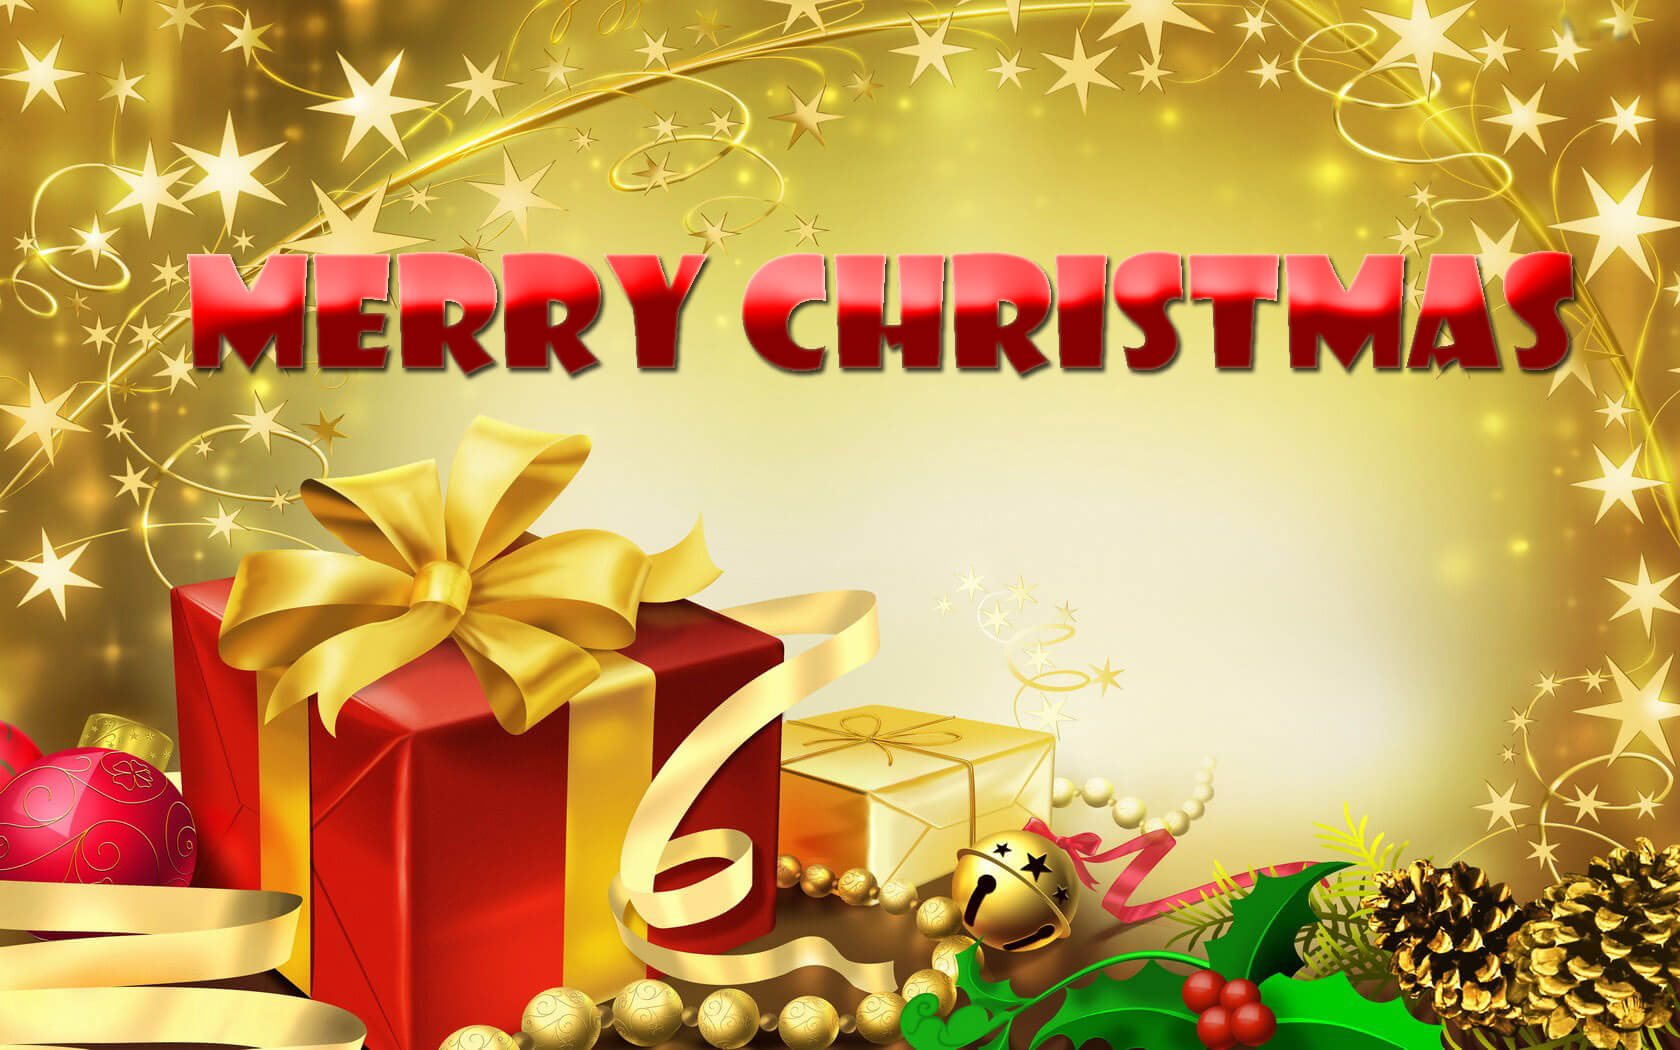 Best Happy Merry Christmas Wallpaper HD Events Yard